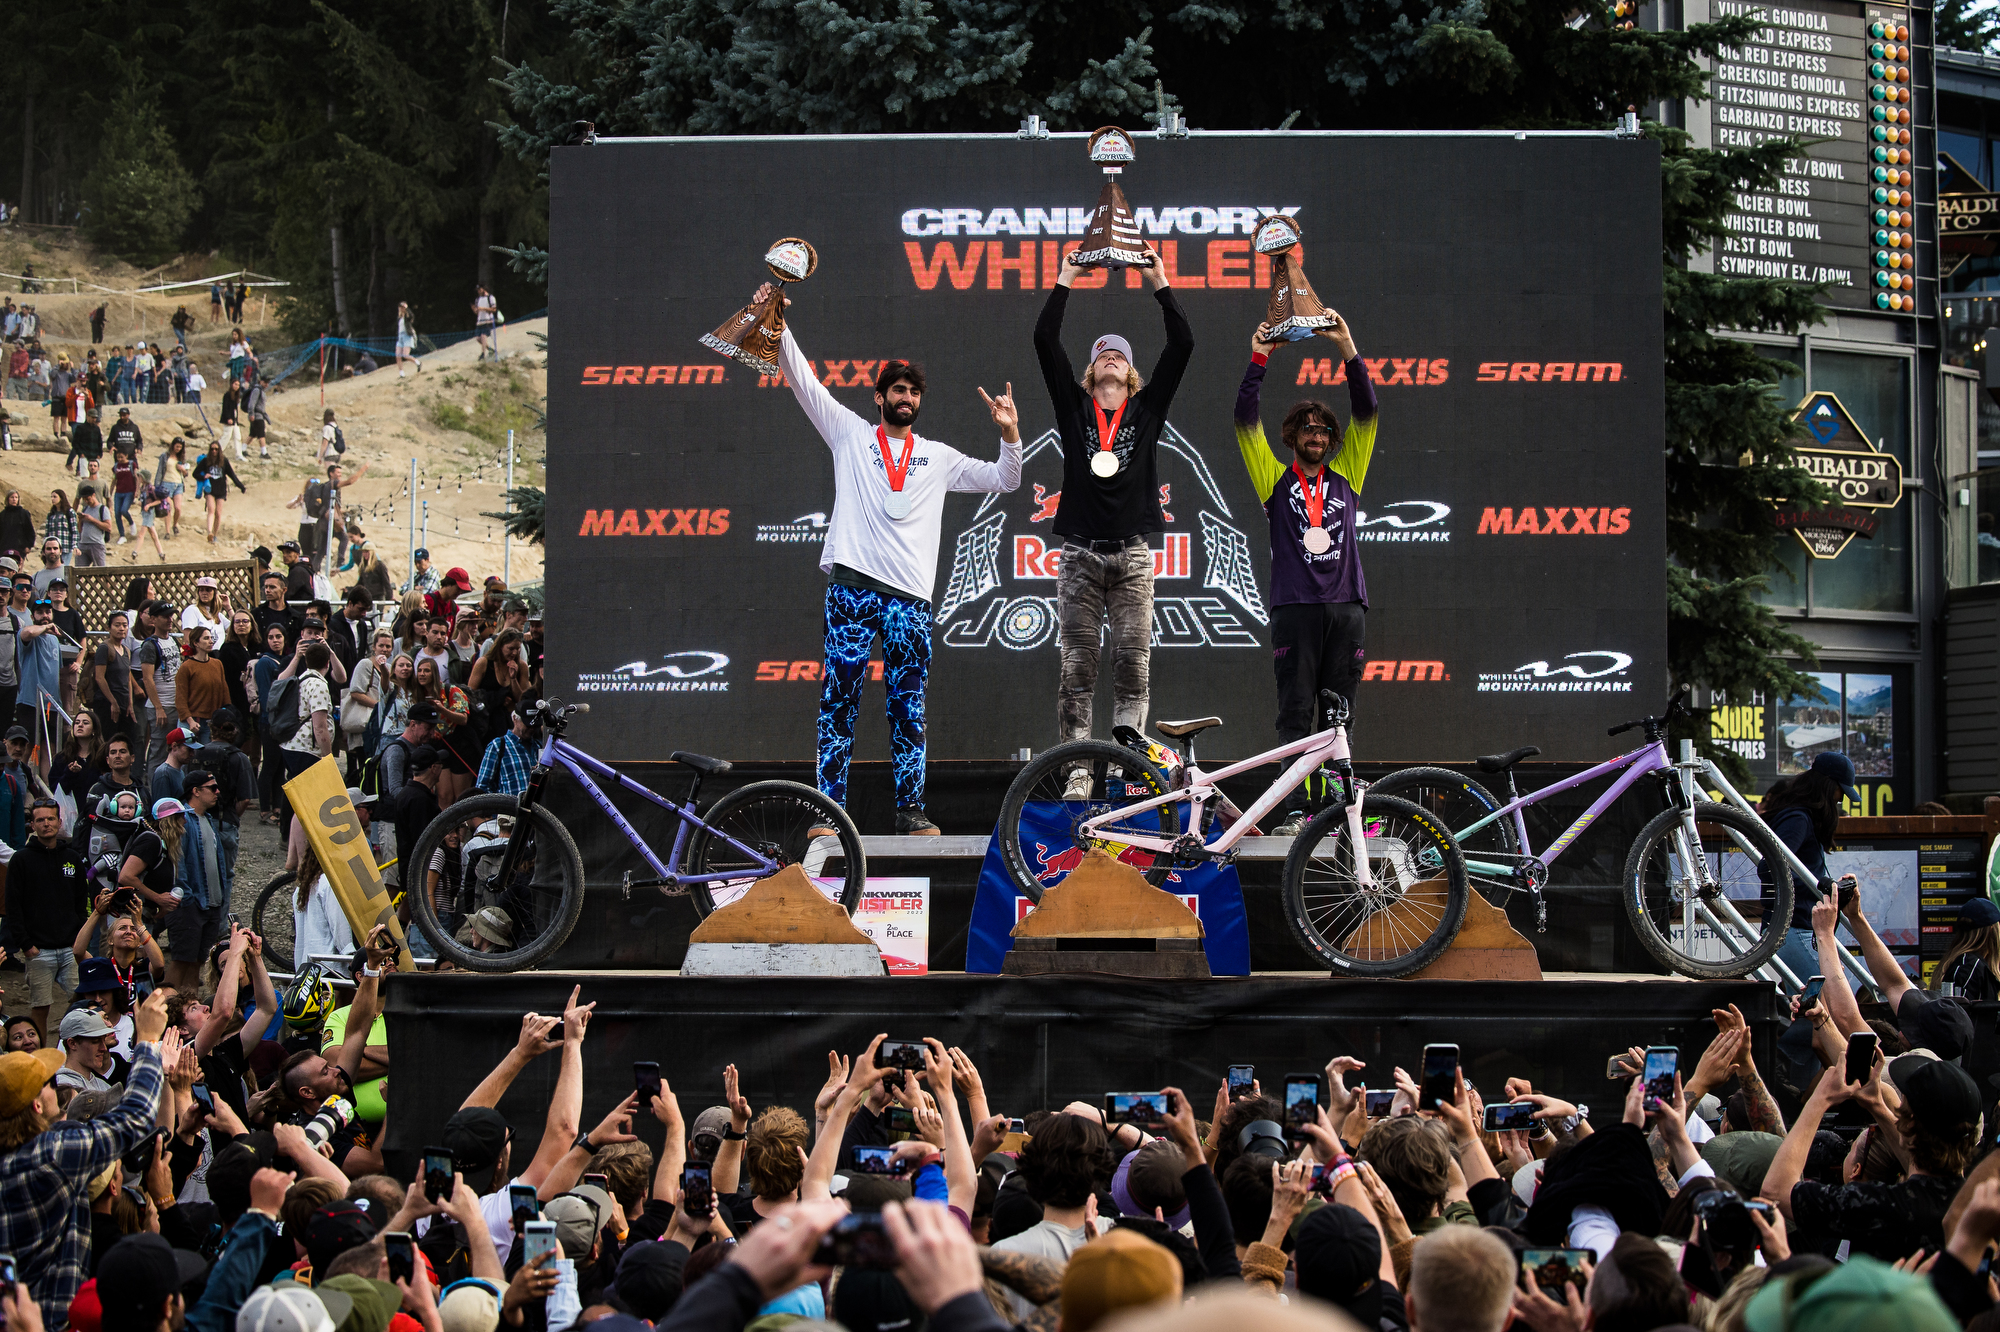 Emil on the top of the Red Bull Joyride podium